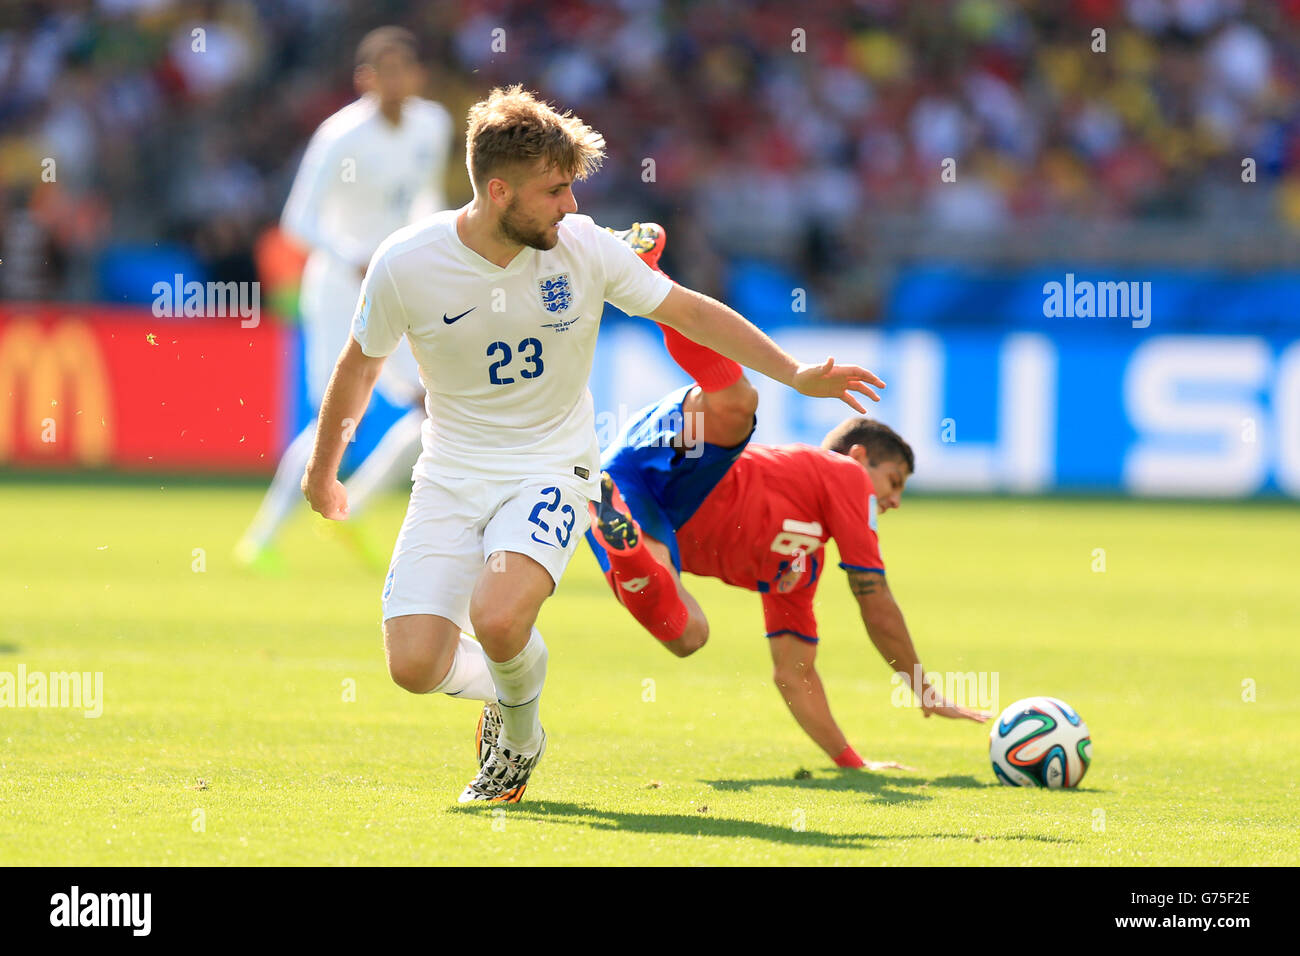 England's Luke Shaw and Costa Rica's Cristian Gamboa (right) battle for the ball during the FIFA World Cup, Group D match at the Estadio Mineirao, Belo Horizonte, Brazil. Stock Photo